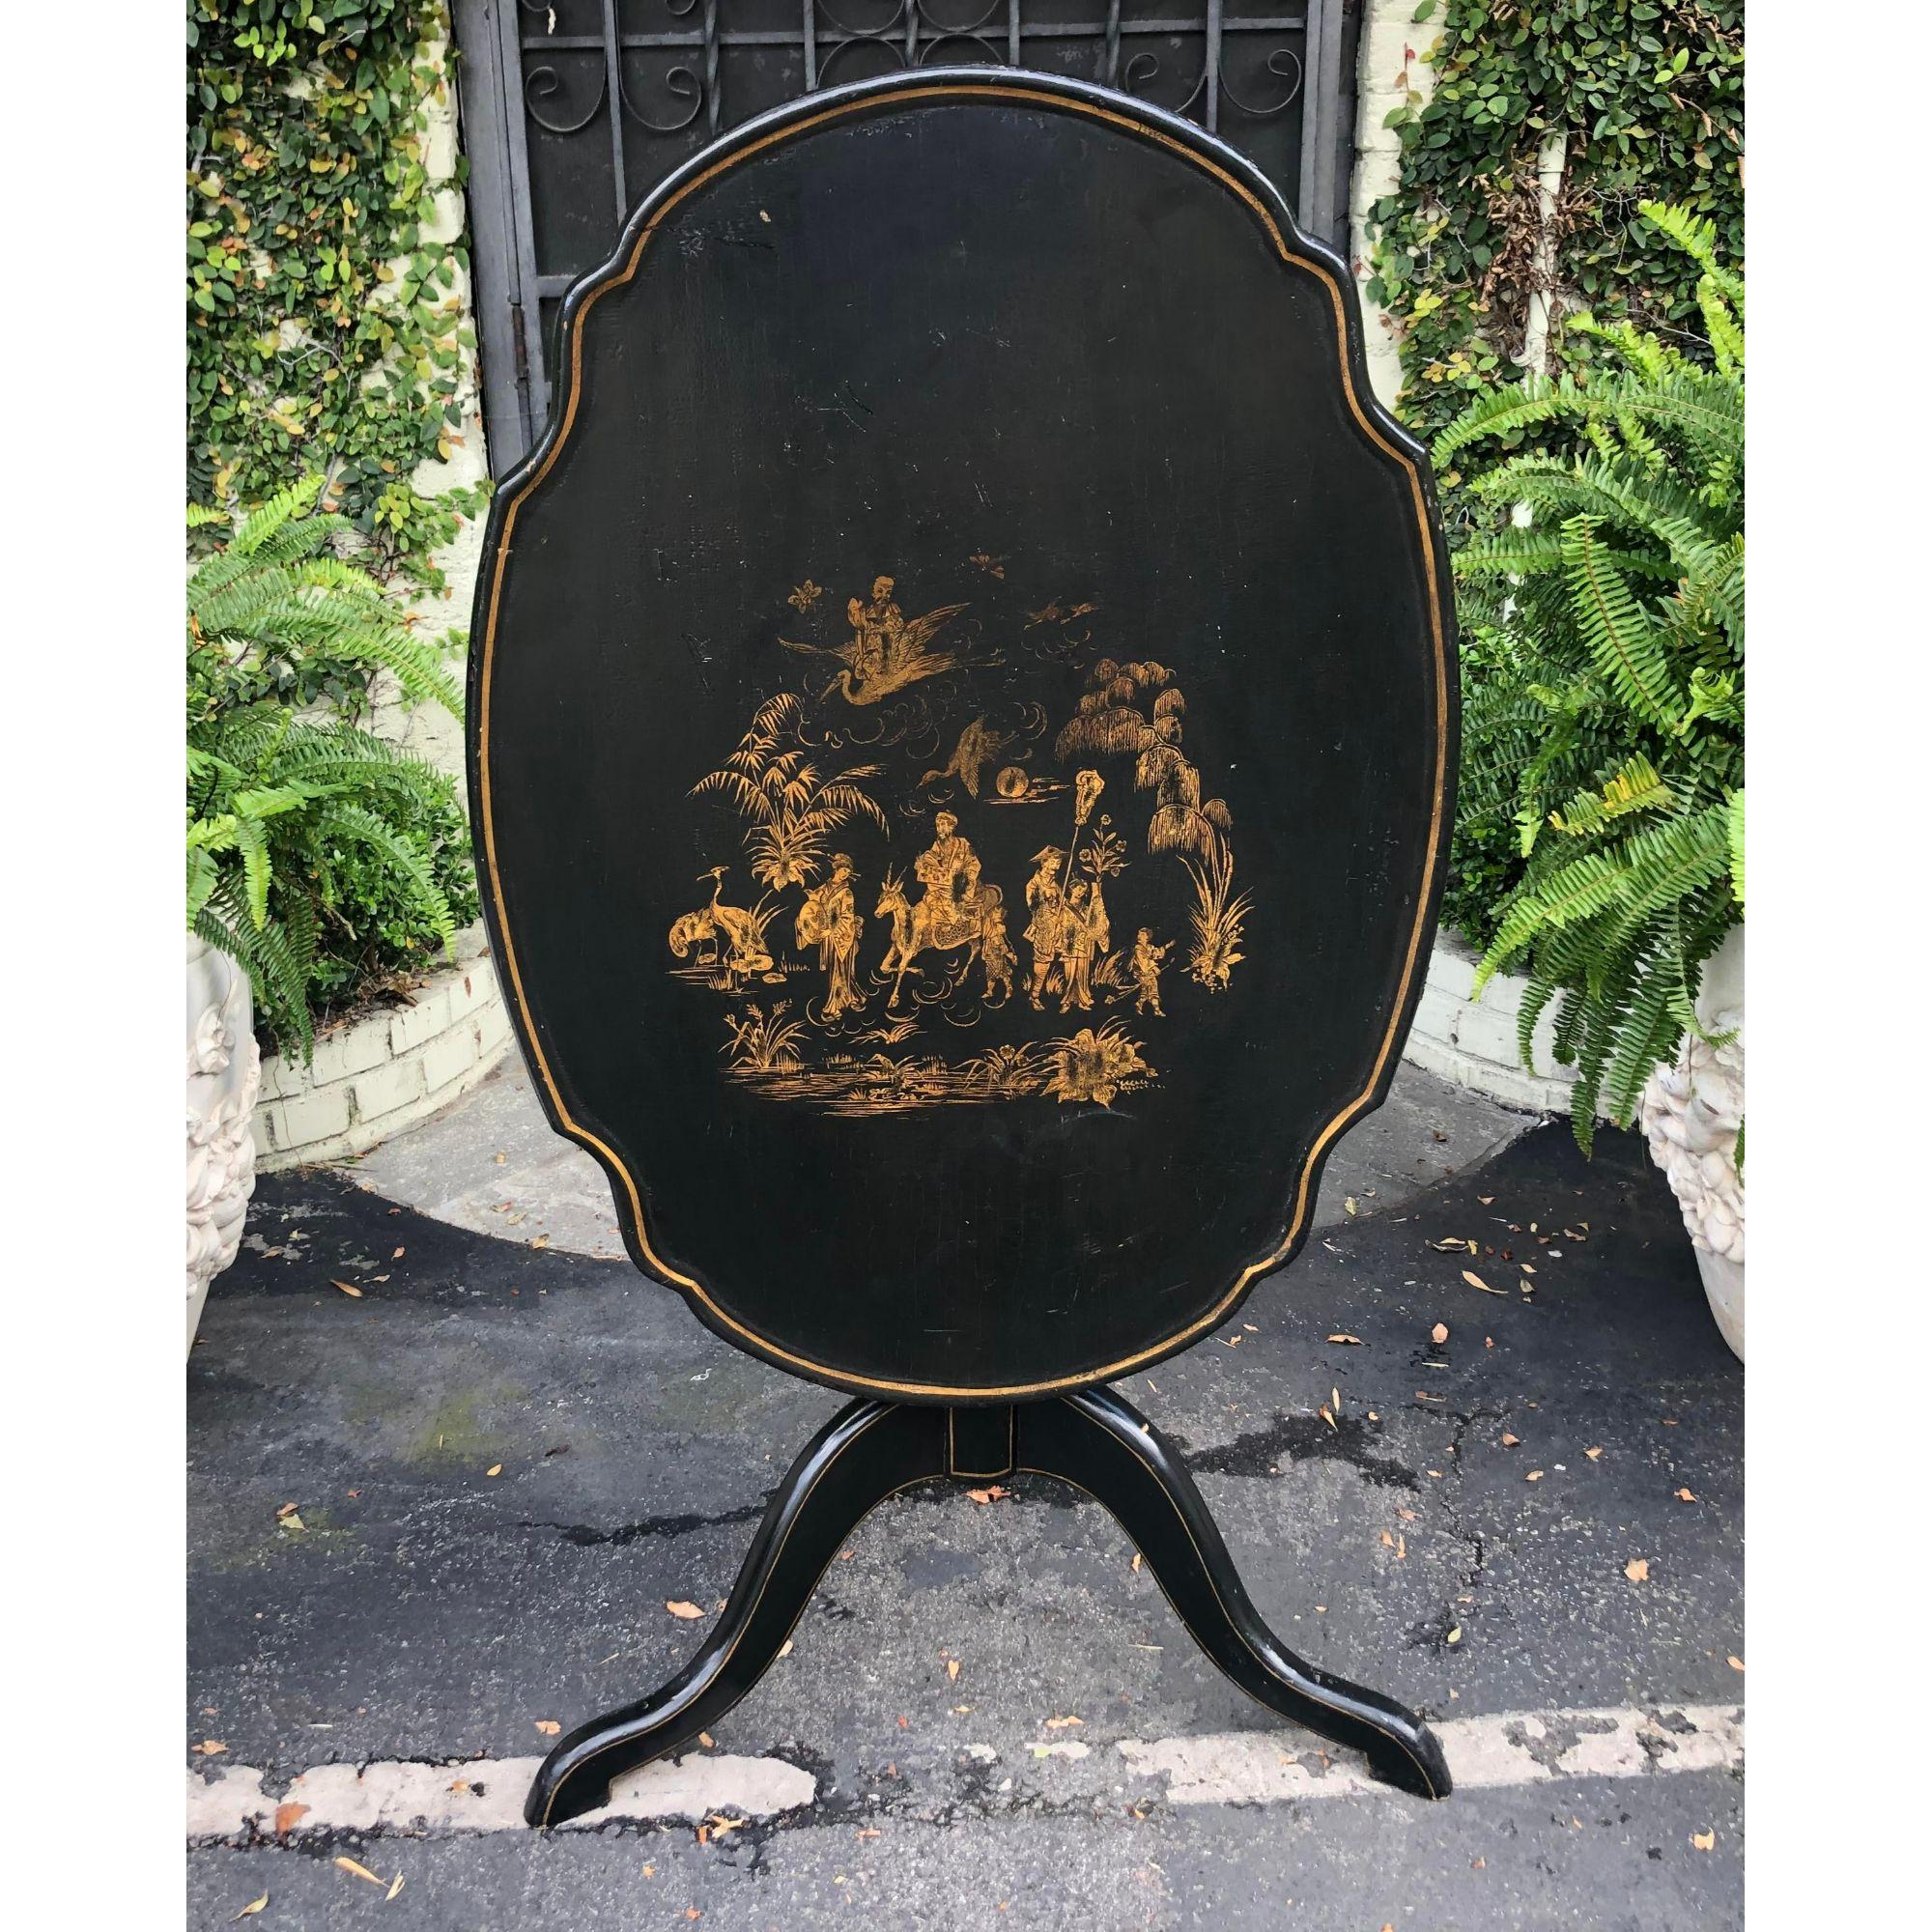 Antique 18C Black & Gold Chinoiserie Decorated Tripod Tilt Top Table 1